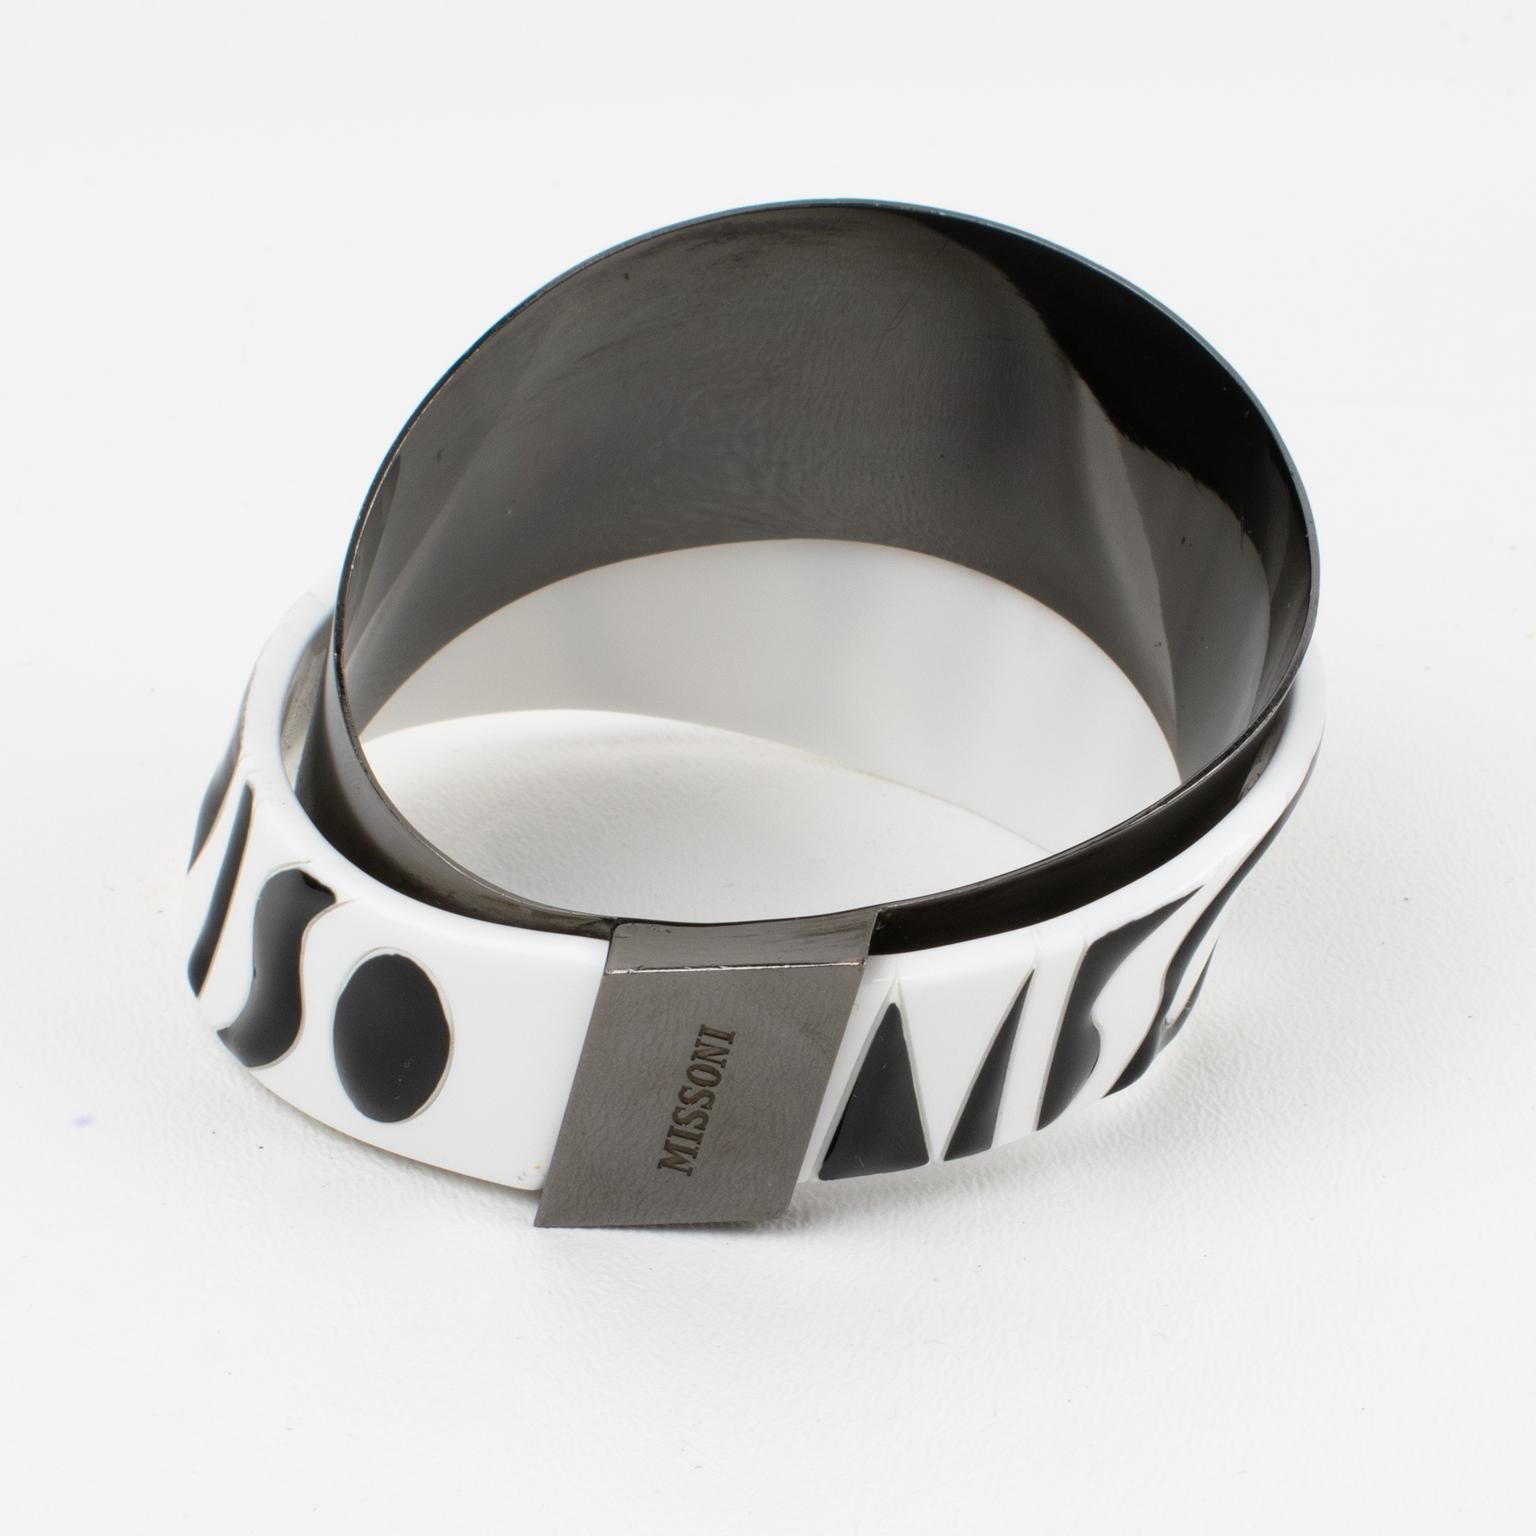 Missoni Italy created this amazing couture bracelet bangle for its ready-to-wear spring 2014 runway show. The bracelet features an asymmetric shape built with a gunmetal band mixed with a black and white Lucite (or PVC) band carved with Missoni's